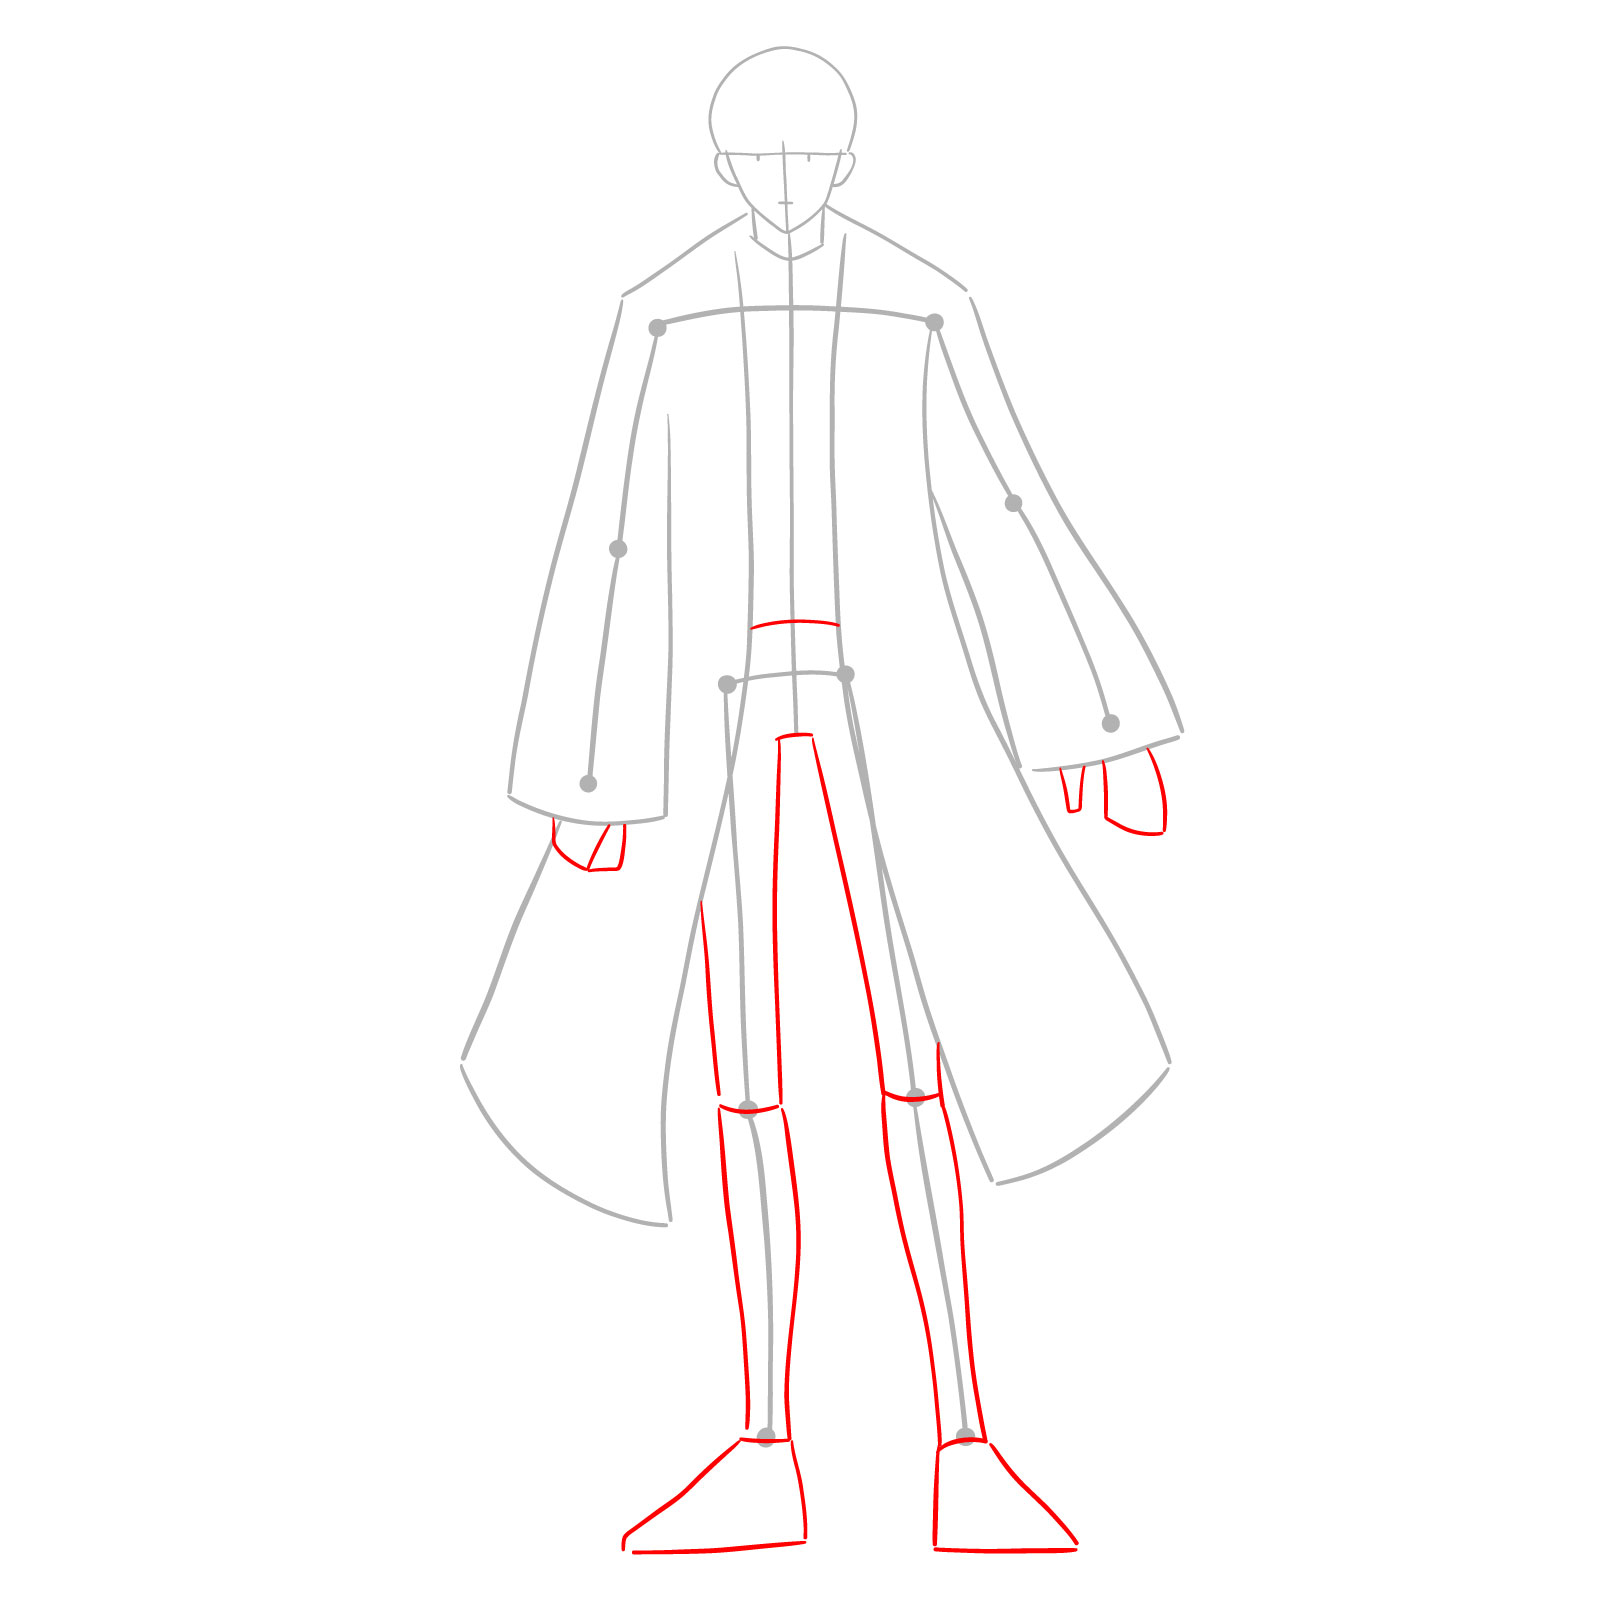 Mash drawing step 3 showing the addition of proportional shapes for limbs - step 03